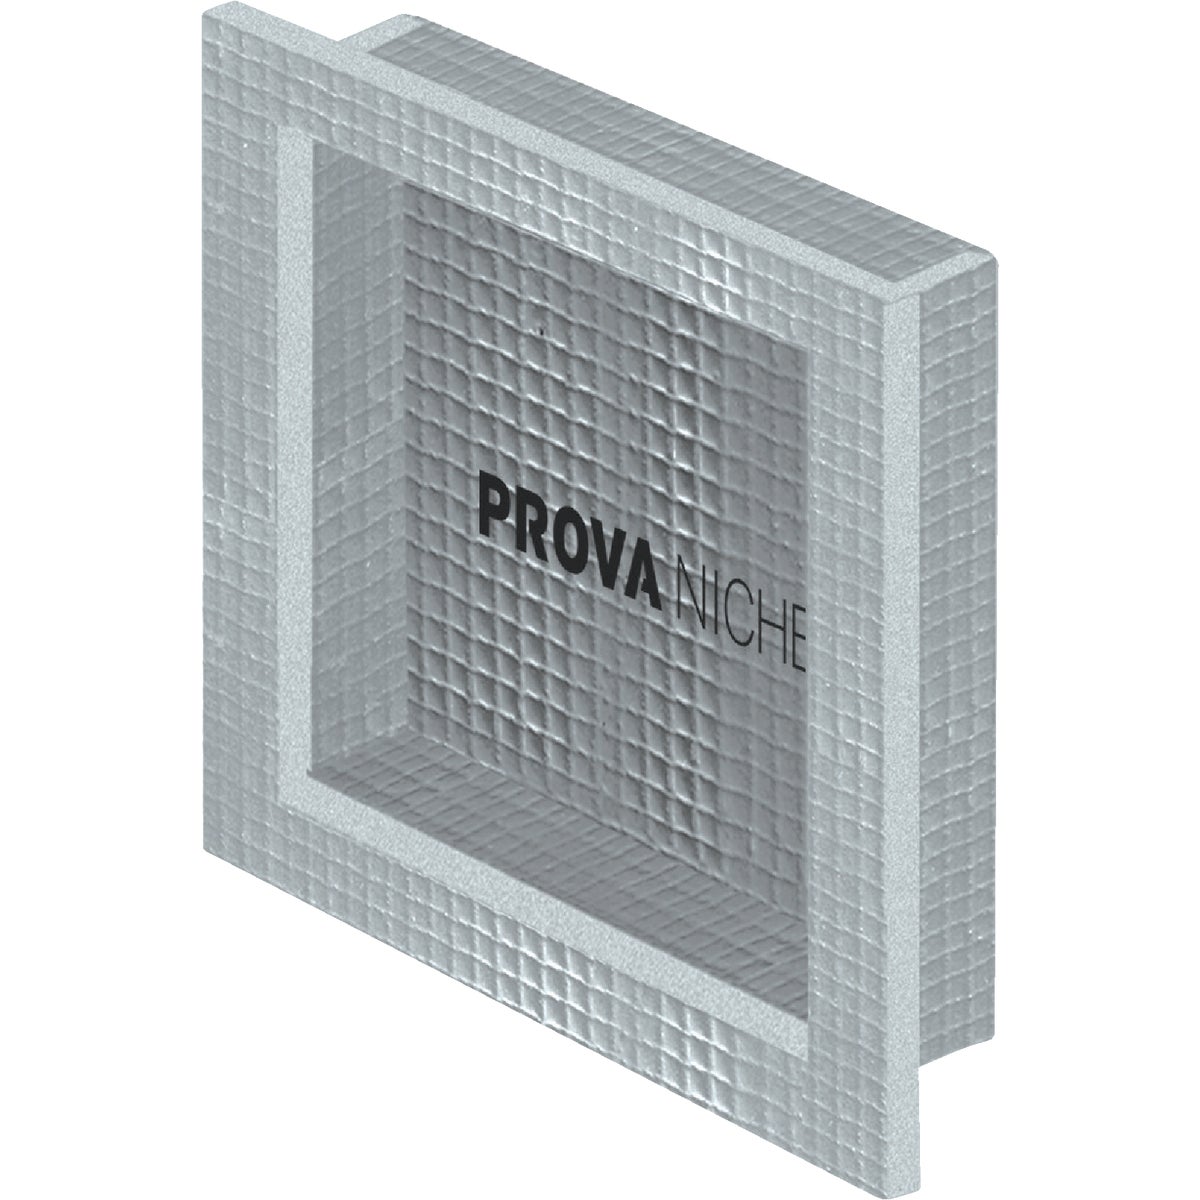 Item 100558, PROVA shower niche is a useful and stylish accessory for tiled showers.